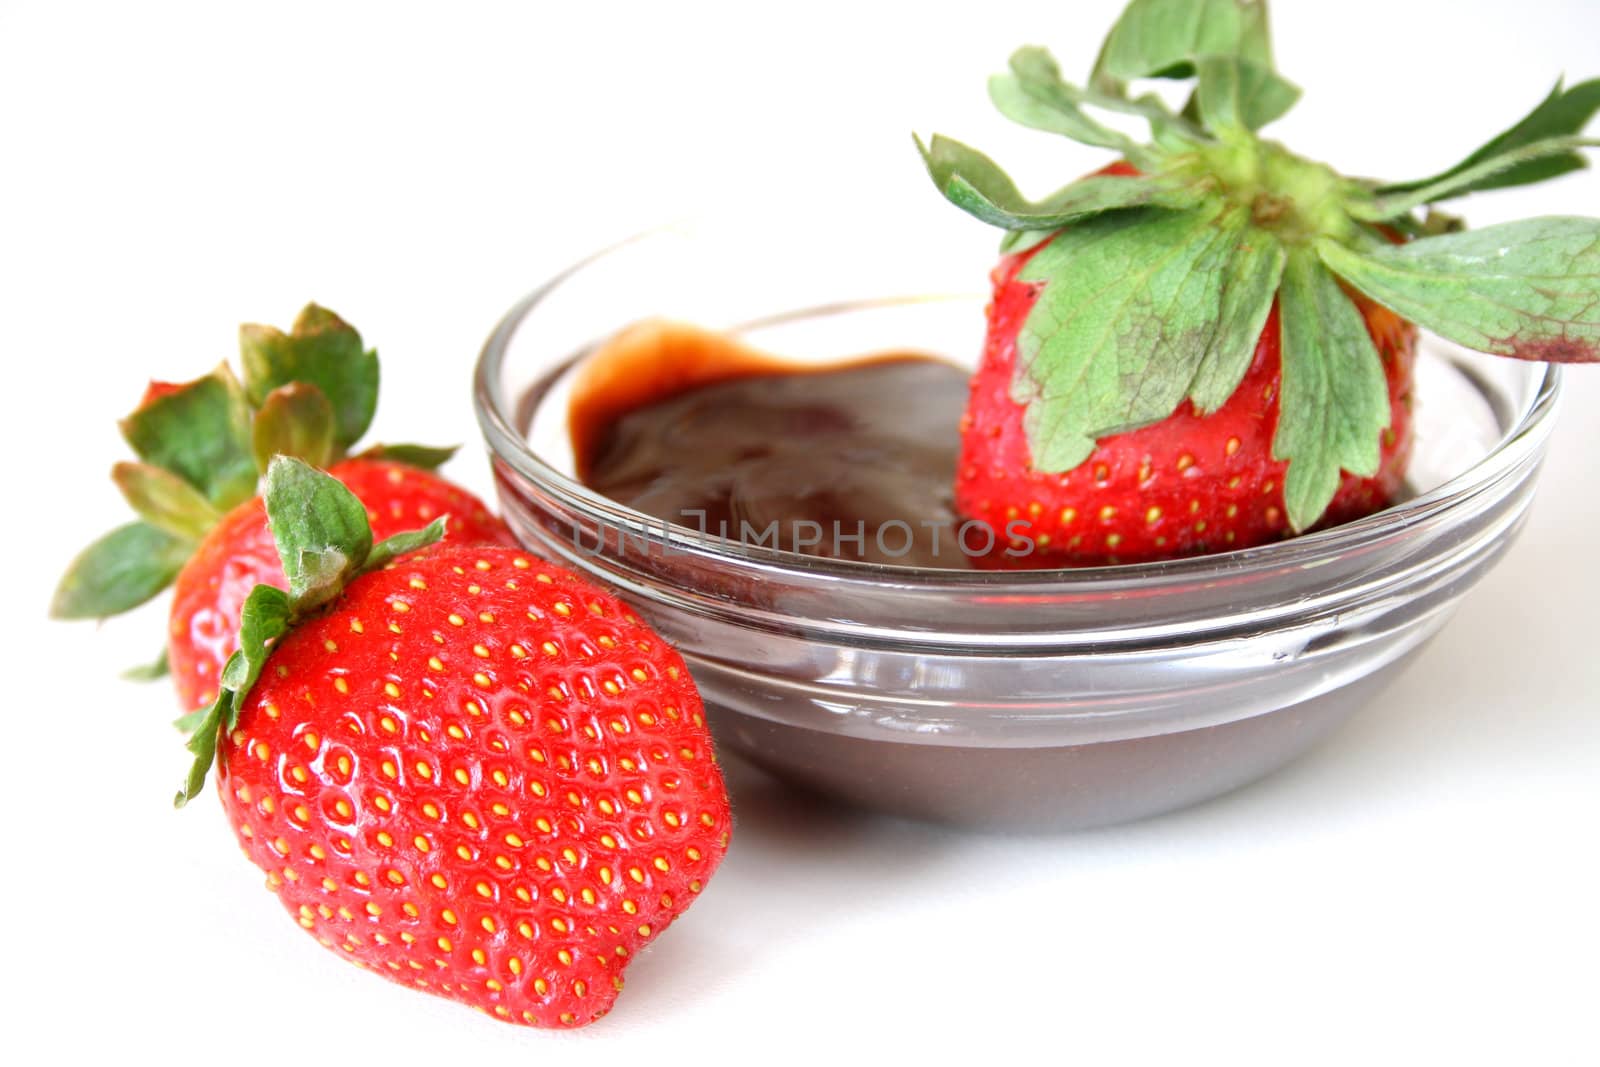 strawberries and chocolate dipping sauce isolated on a white background.
